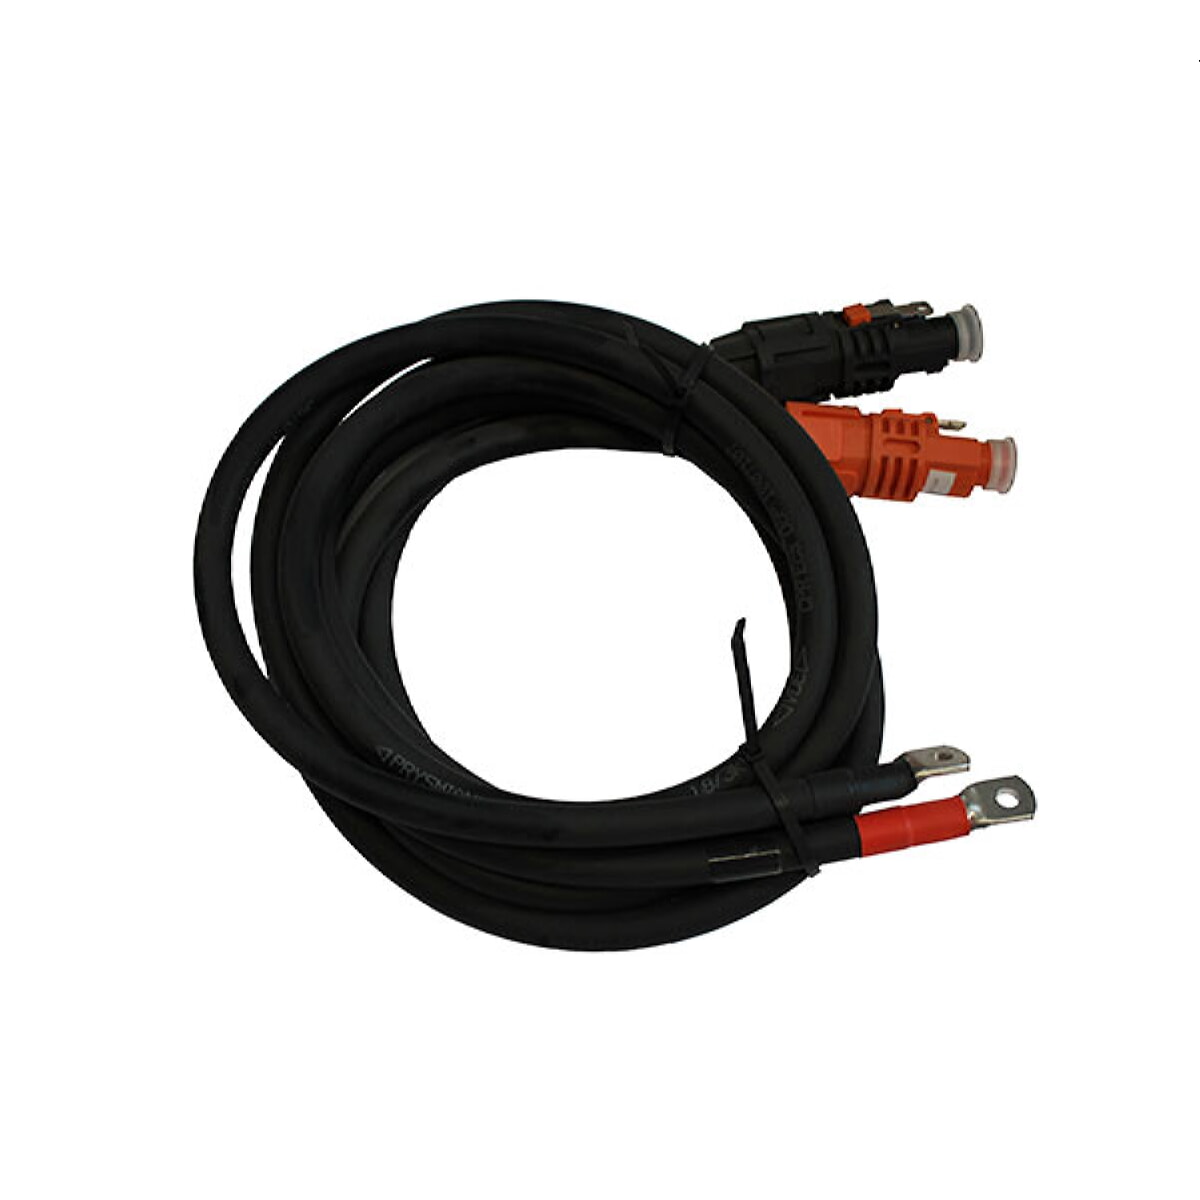 HiS cable set with plug for connecting SMA + BYD LVS